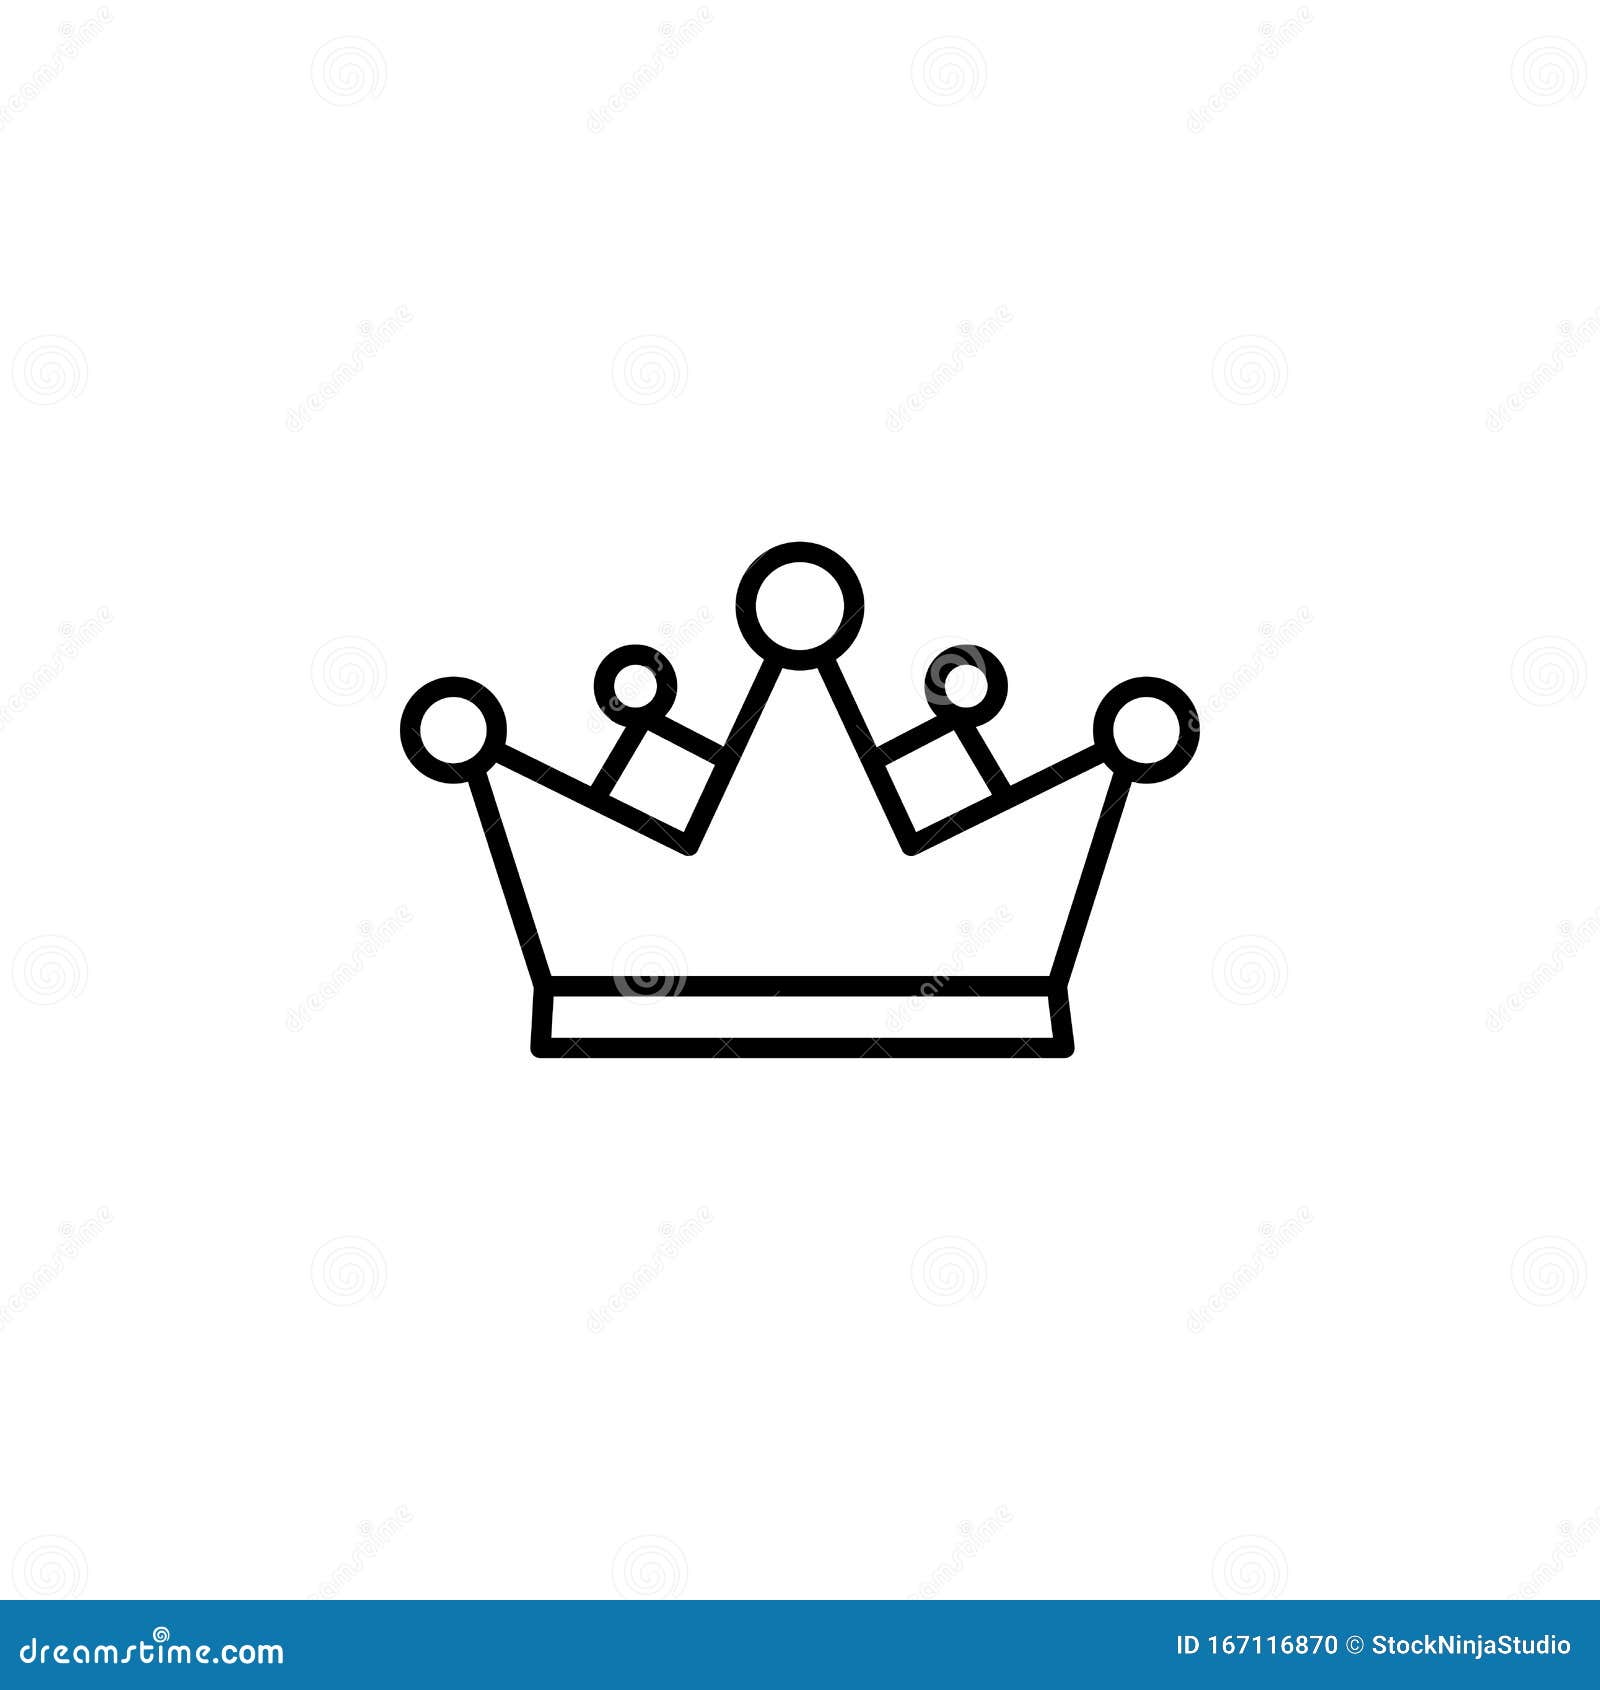 Crown Line Icon in Flat Style Vector Icon for Apps, UI, Websites. Black ...